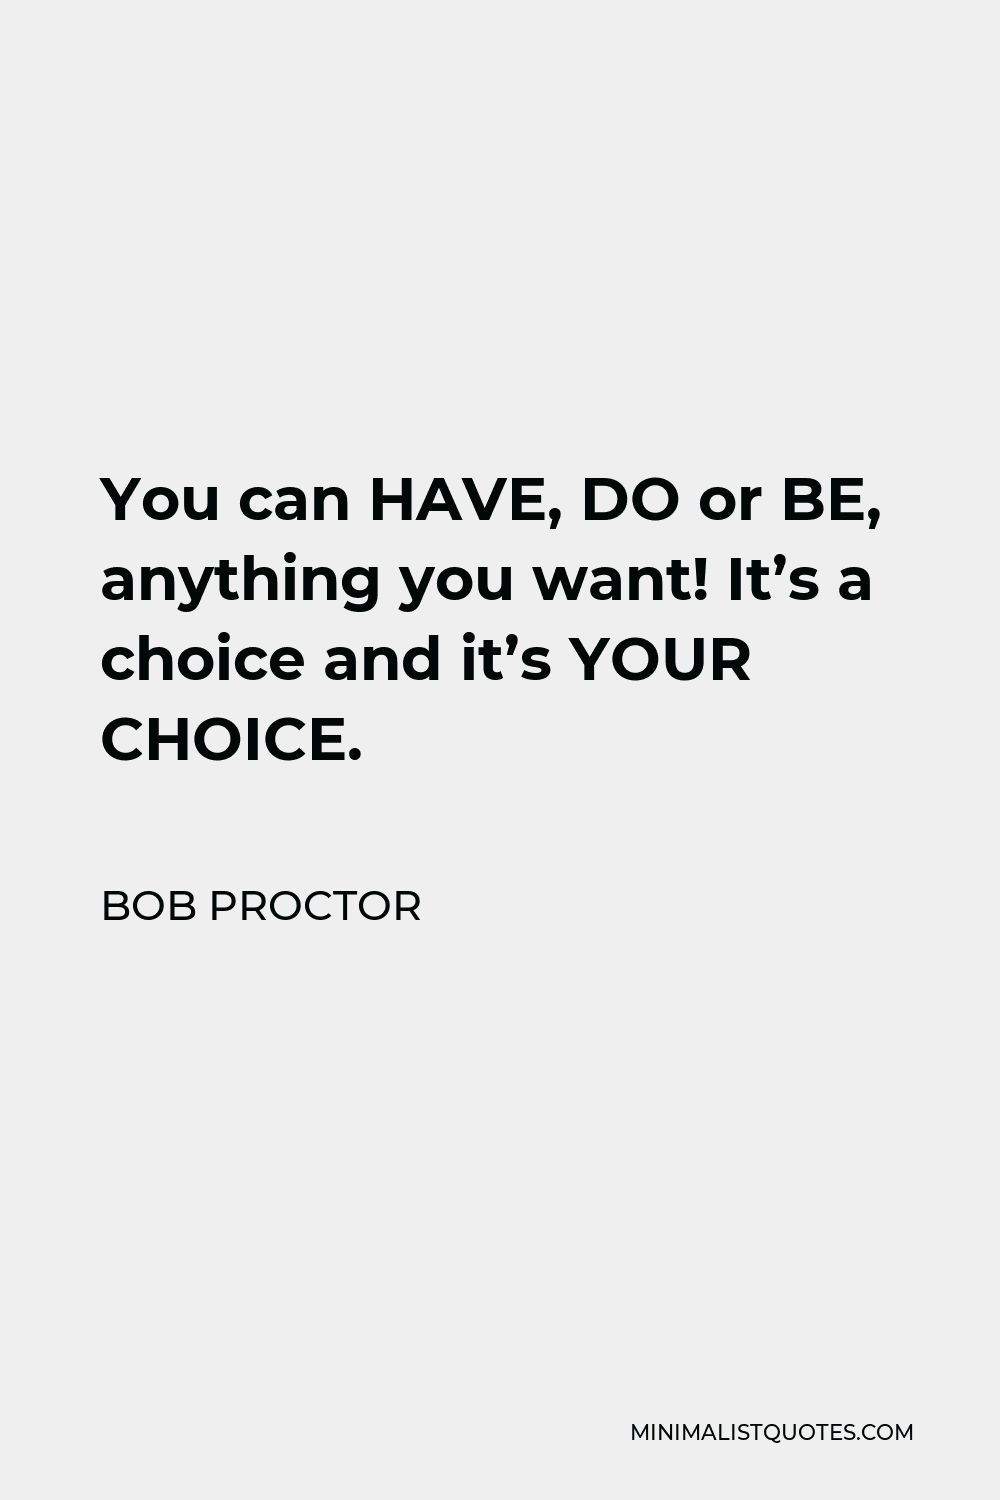 bob-proctor-quote-you-can-have-do-or-be-anything-you-want-it-s-a-choice-and-it-s-your-choice